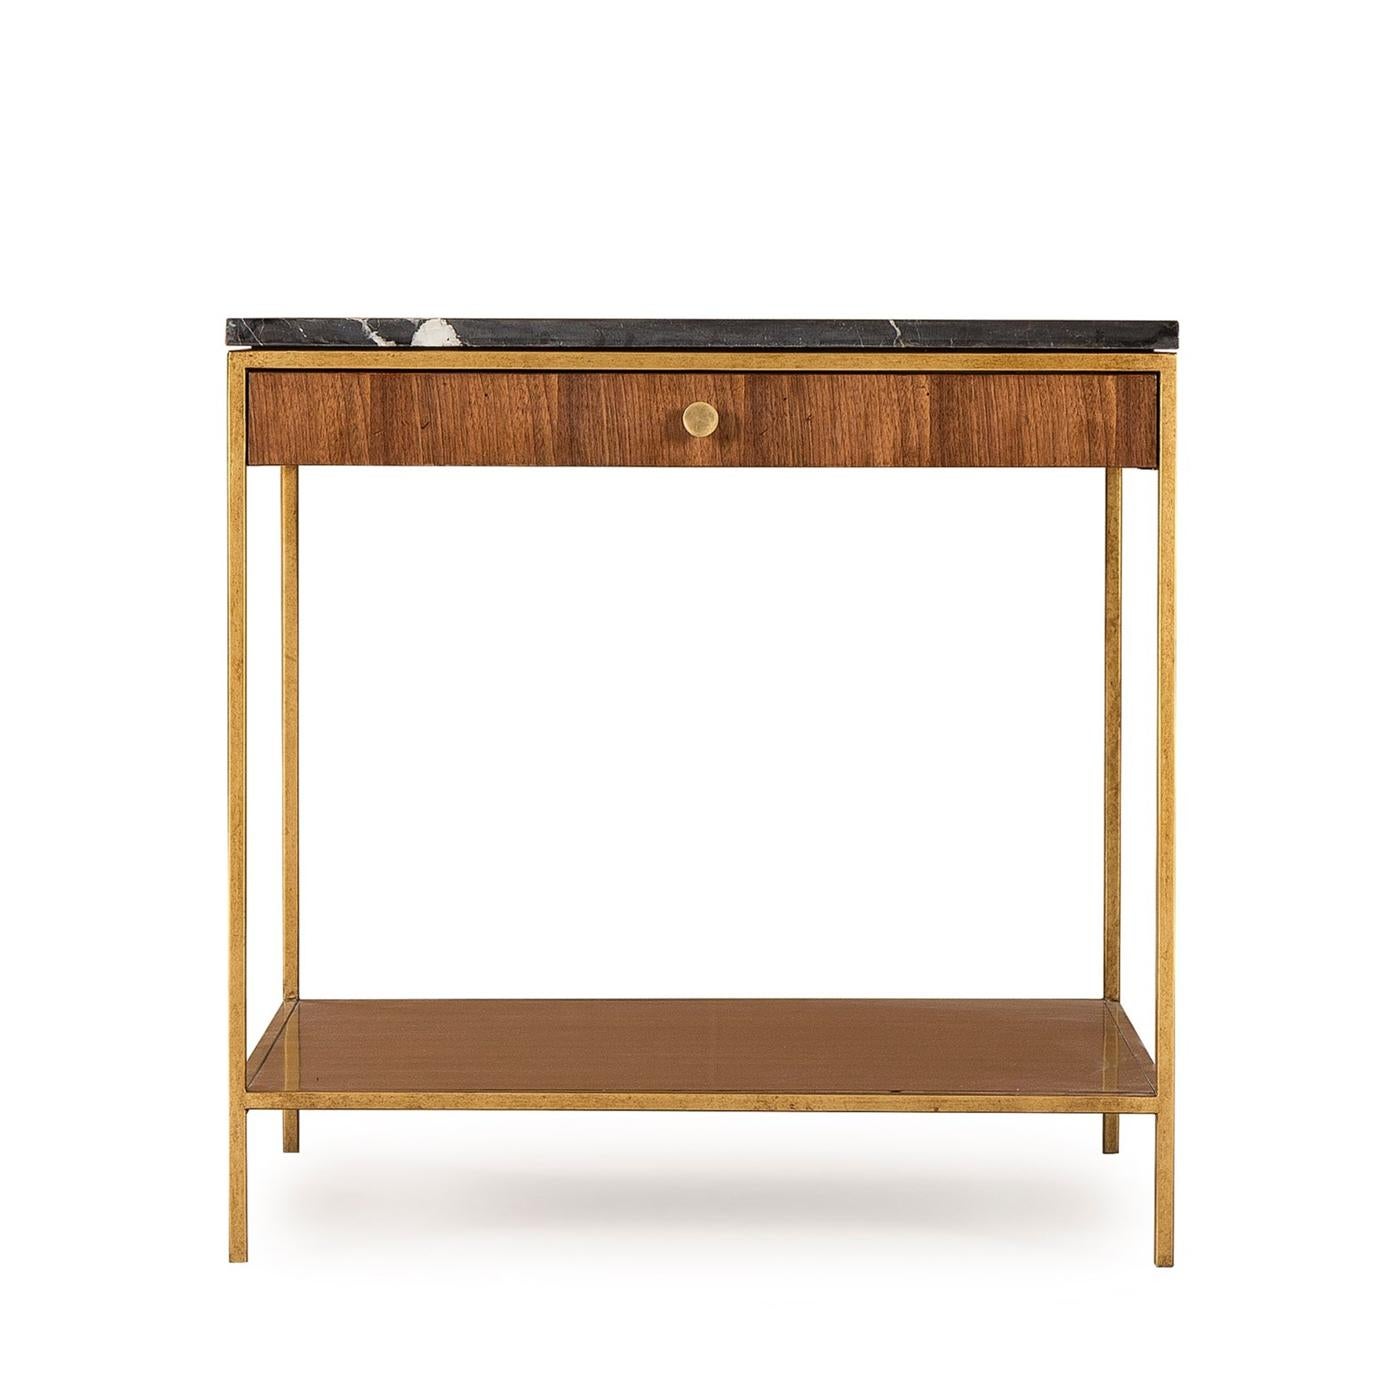 Side table Carolina with structure in metal in brass
finish with solid oak and walnut structure. With black
marquina marble top. Side table including 1 drawer.